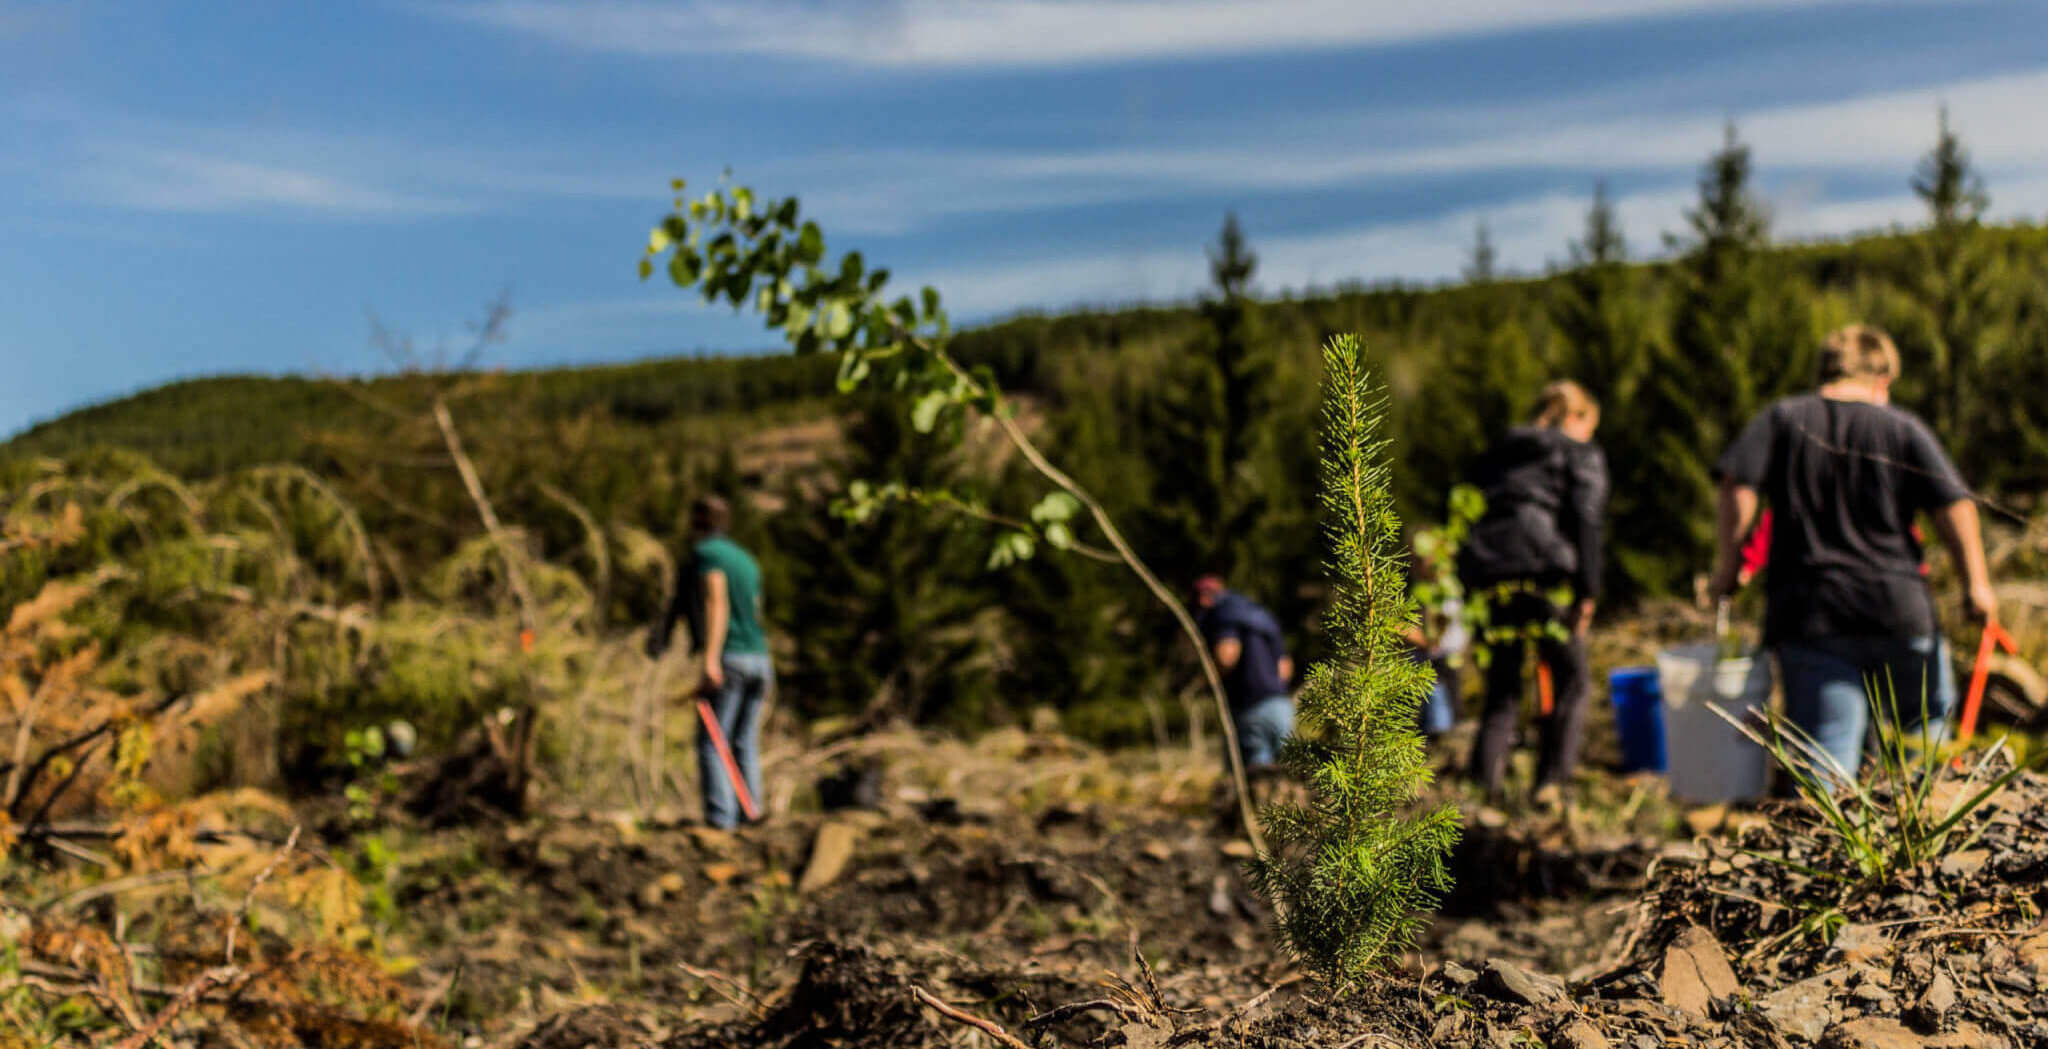 New trees planted as park of Laurel Fork Reforestation project